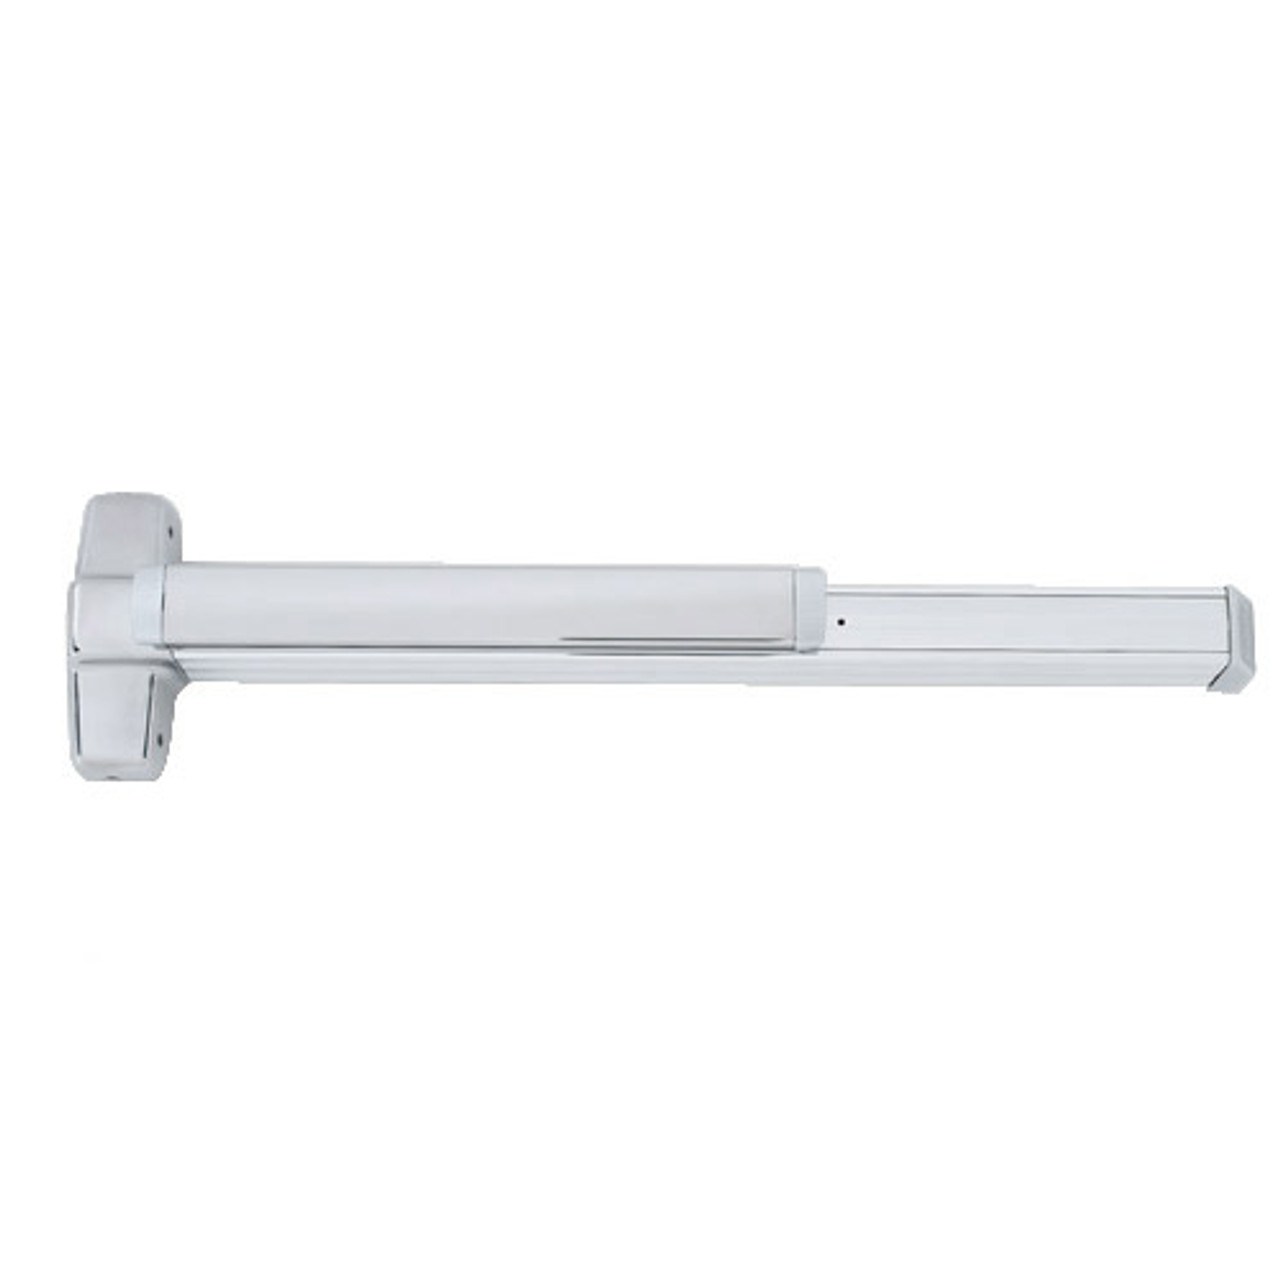 QEL9847WDC-EO-US28-4 Von Duprin Exit Device with Quiet Electric Latch in Anodized Aluminum